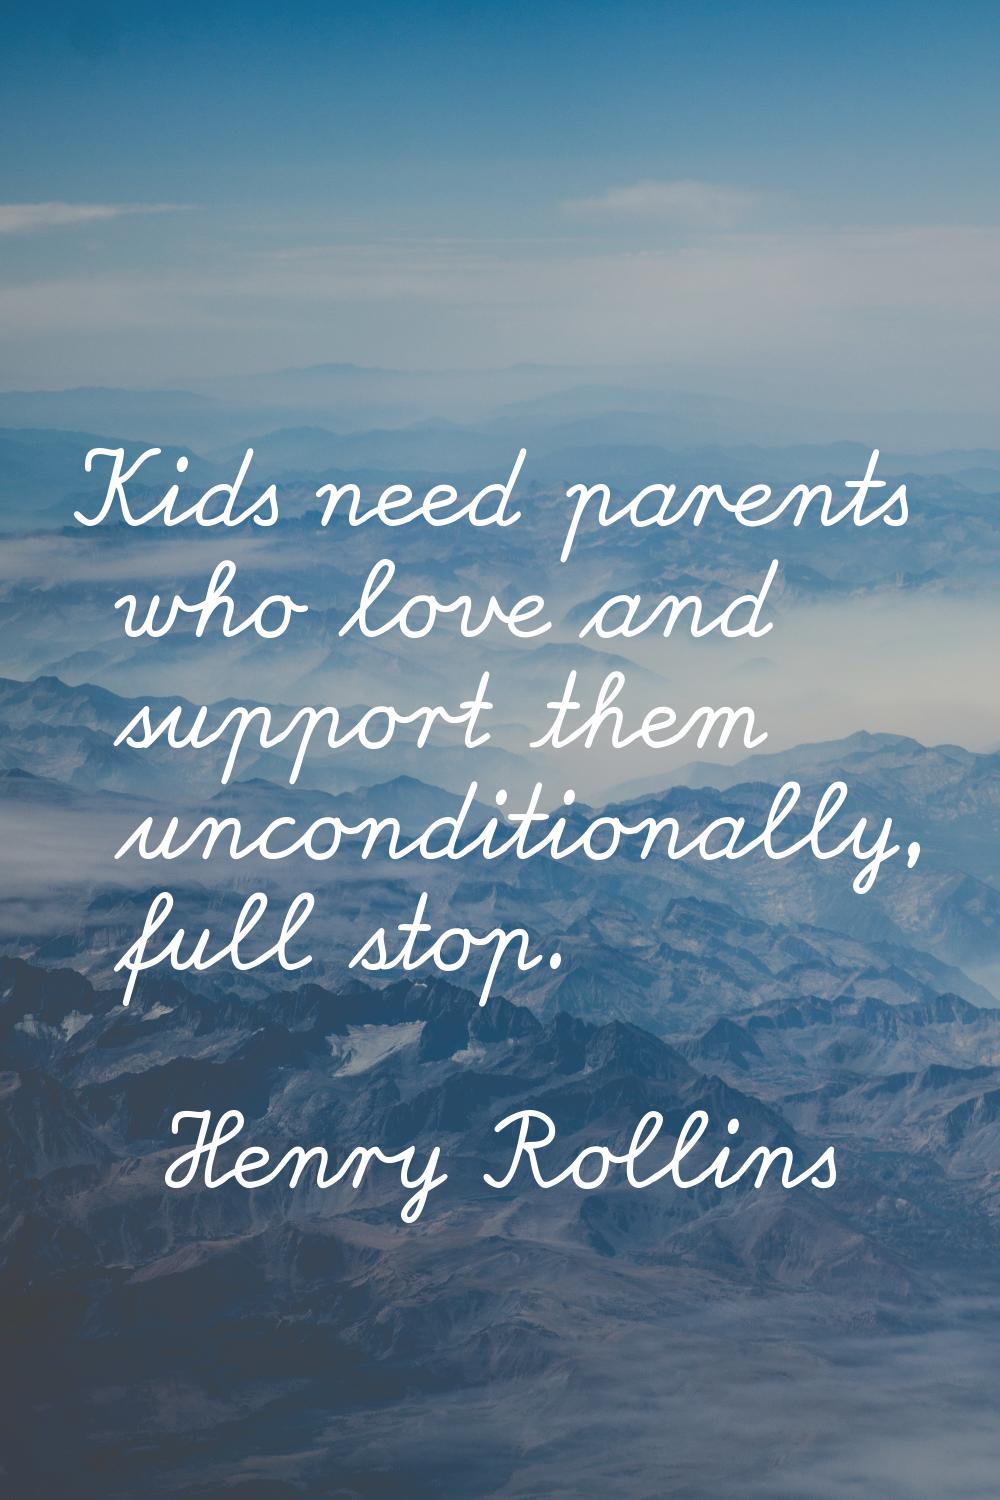 Kids need parents who love and support them unconditionally, full stop.